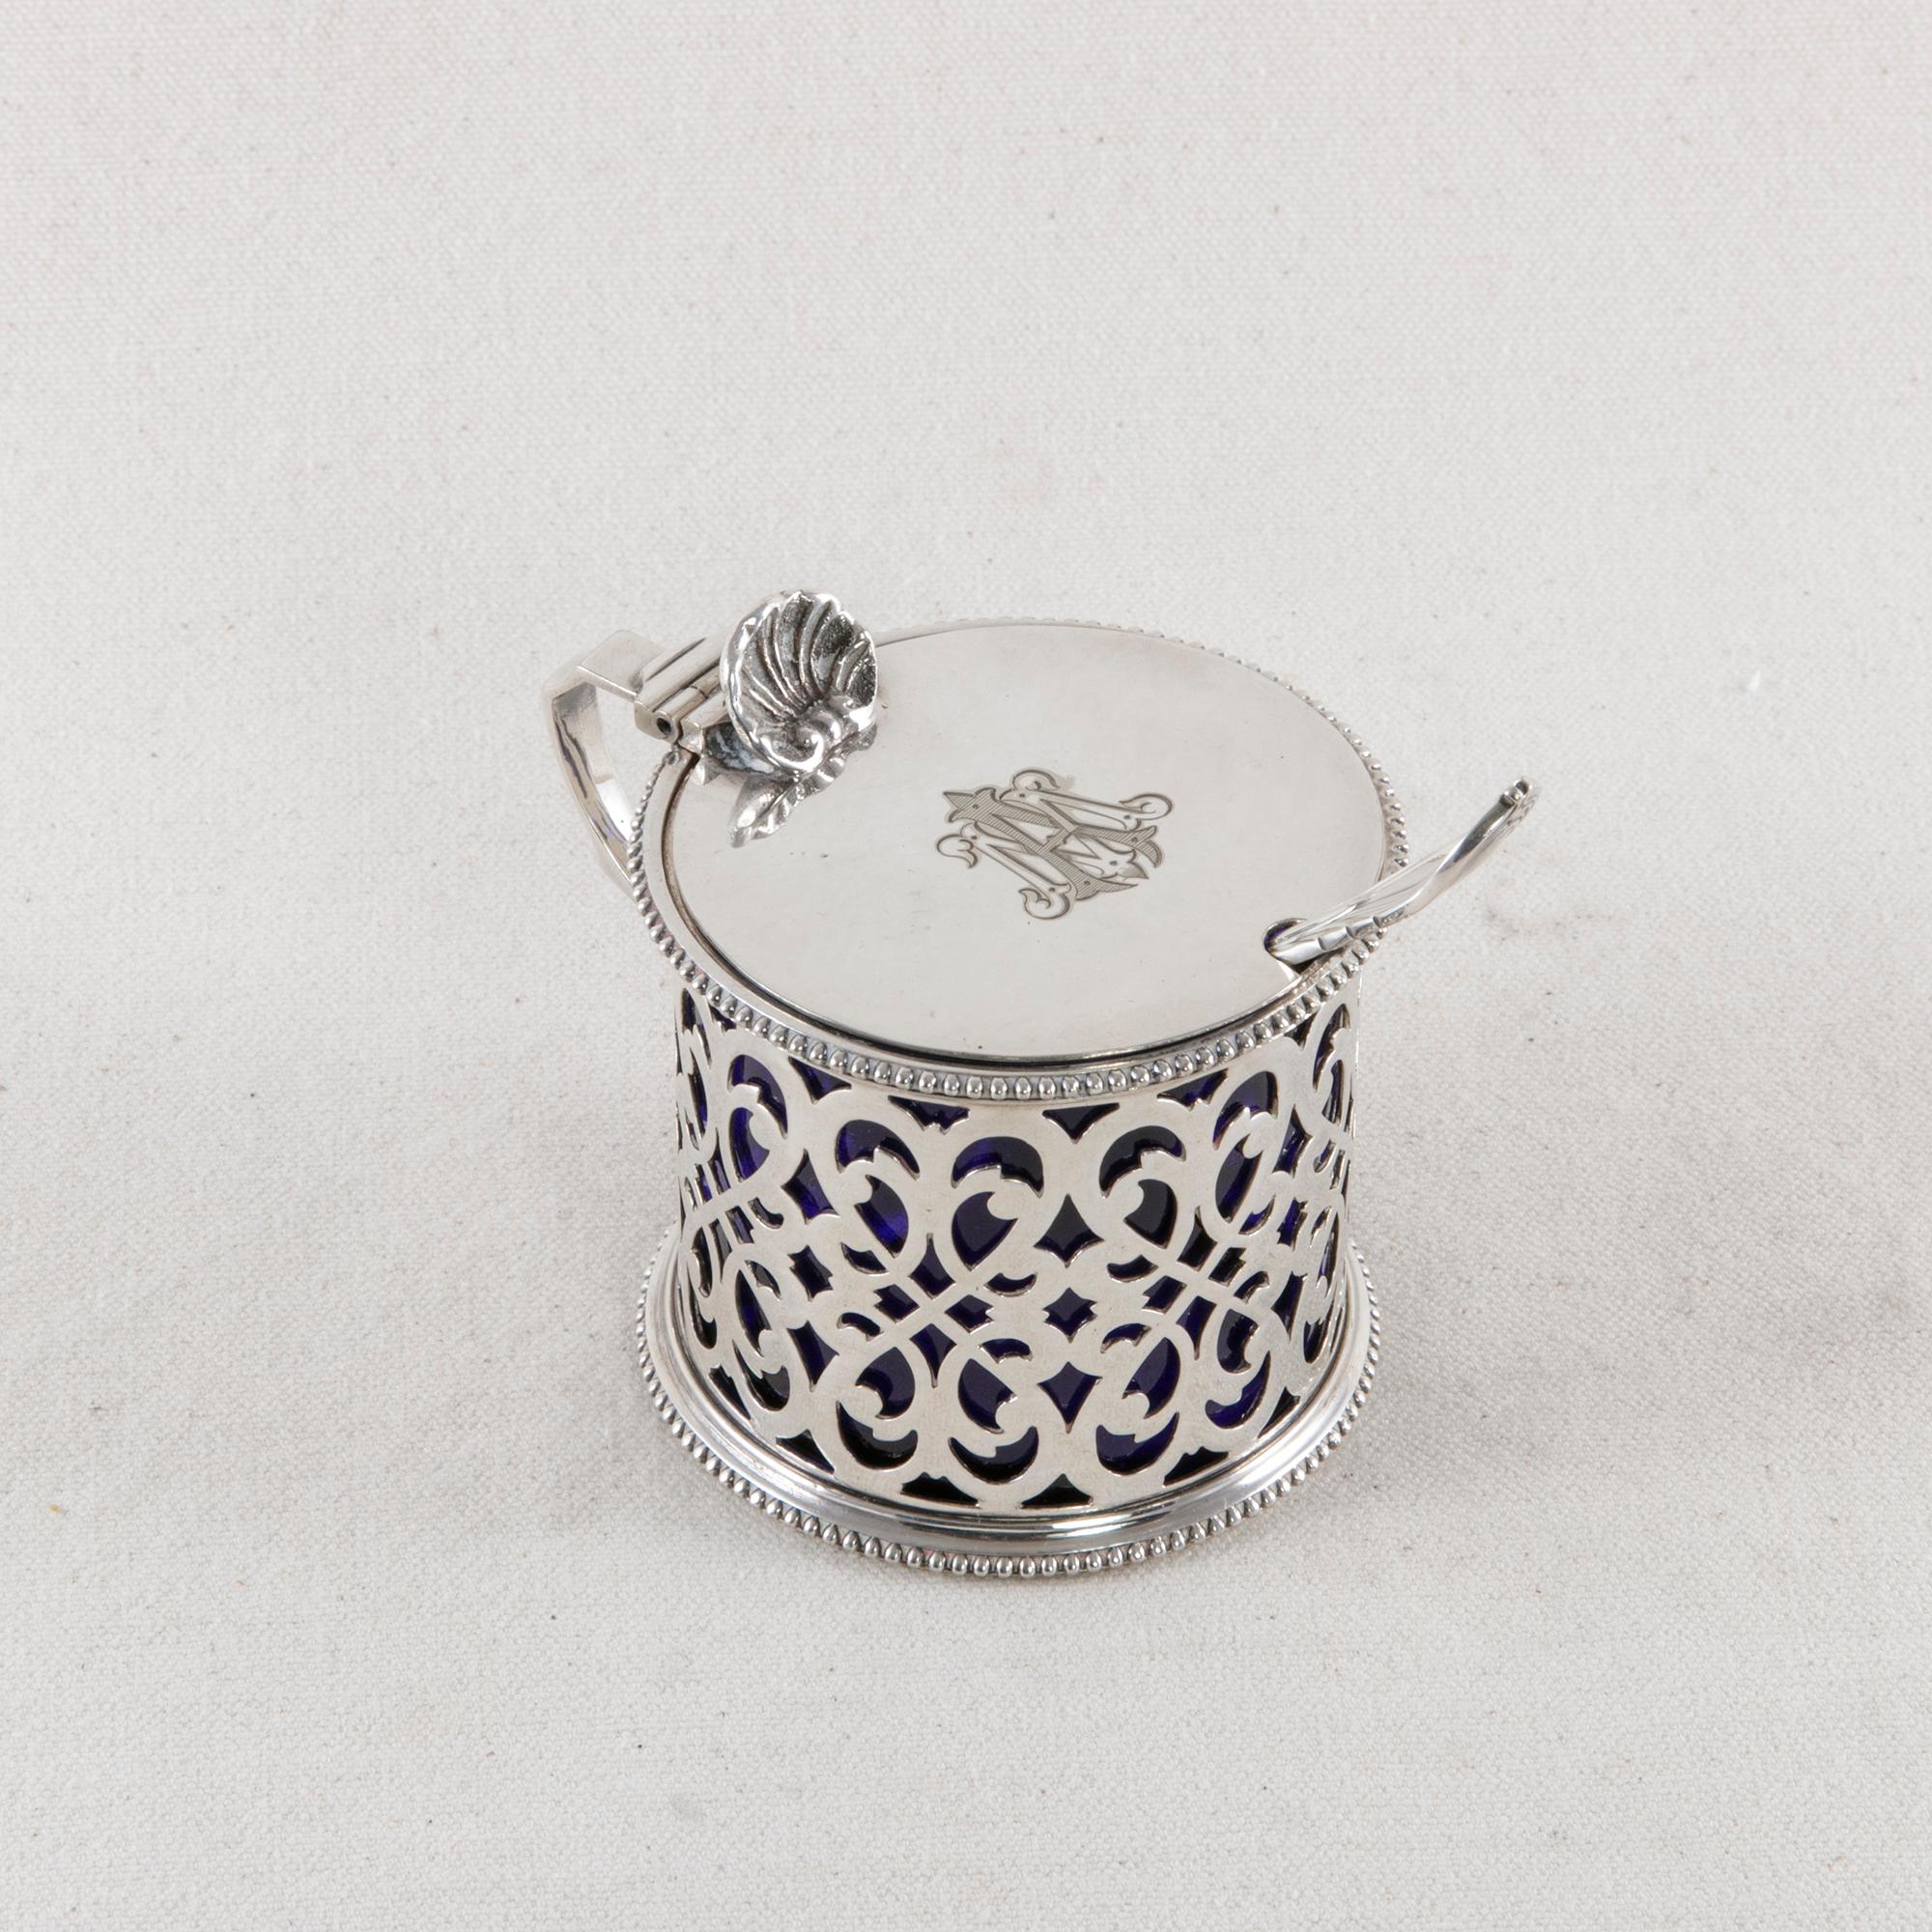 This late 19th century English silver plate mustard pot features the monogram A.M. on its hinged lid. The pierced facade has a scrolling pattern, and beading surrounds the top and bottom. A shell at the top of the handle acts as a thumb lever. On